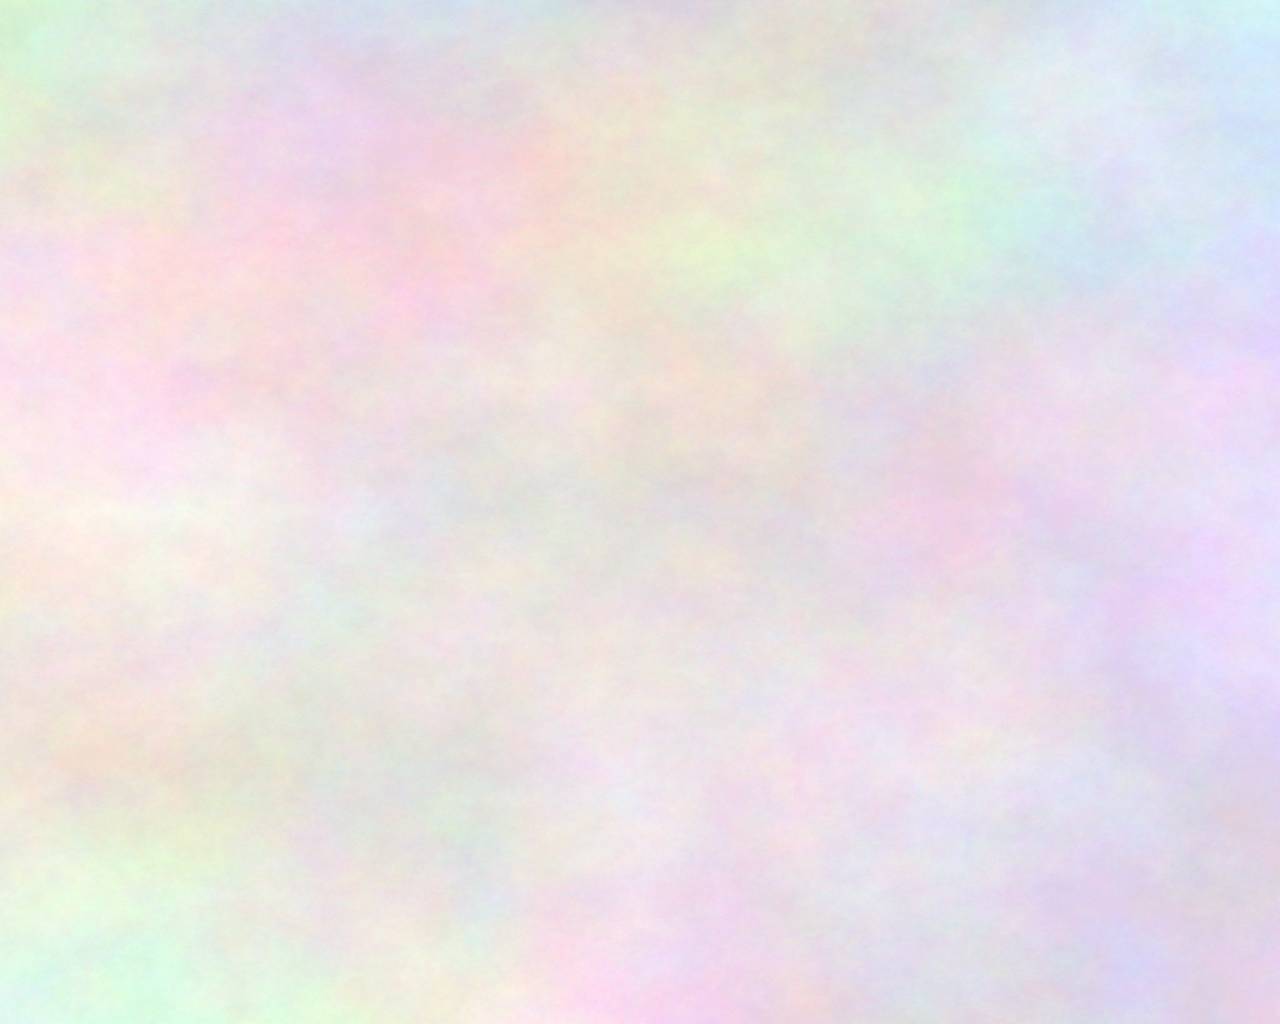 Pastel Plasma Colors Background Image Wallpaper or Texture free for